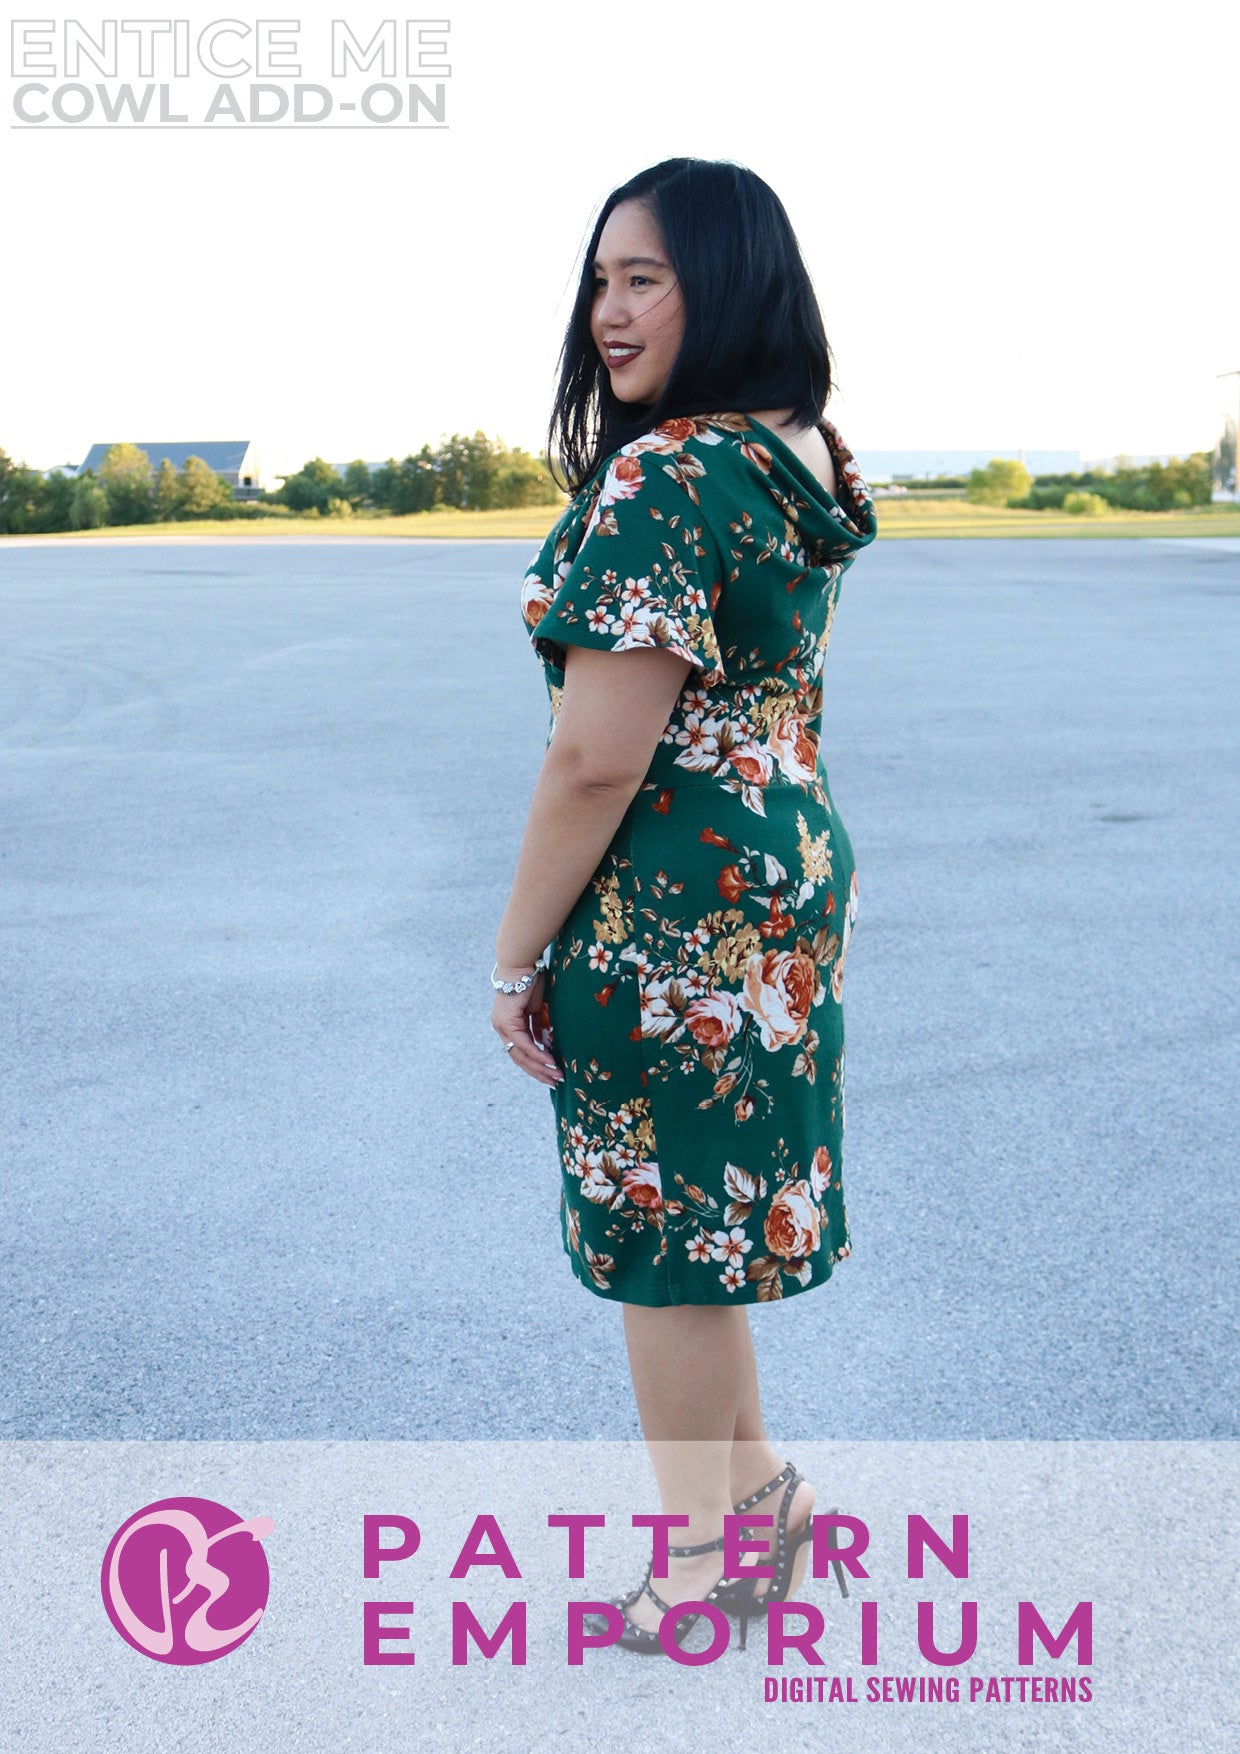 Entice Me Dress | Cowl Back Add-on Sewing Pattern